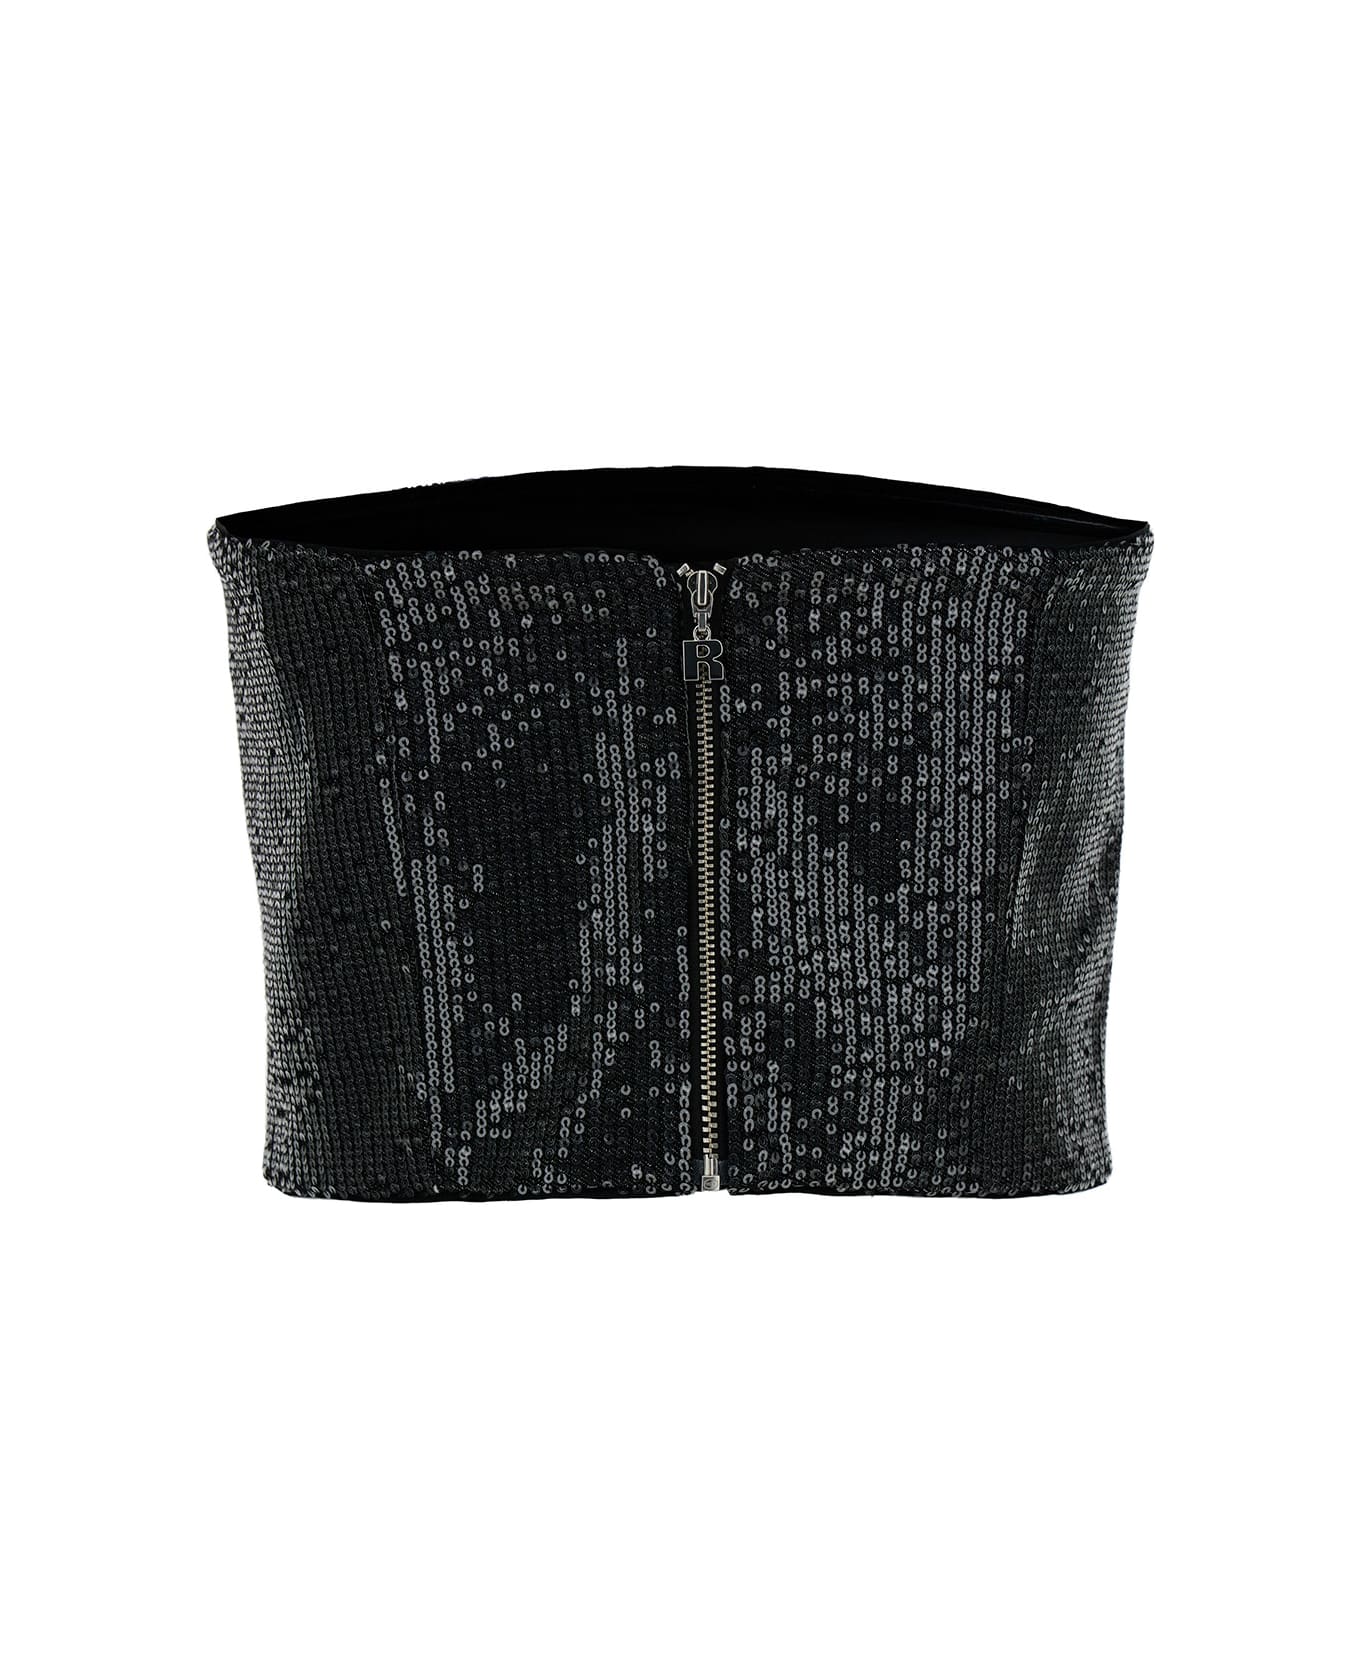 Rotate by Birger Christensen Black Strapless Top With All-over Paillettes Embellishment In Cotton Woman - Black